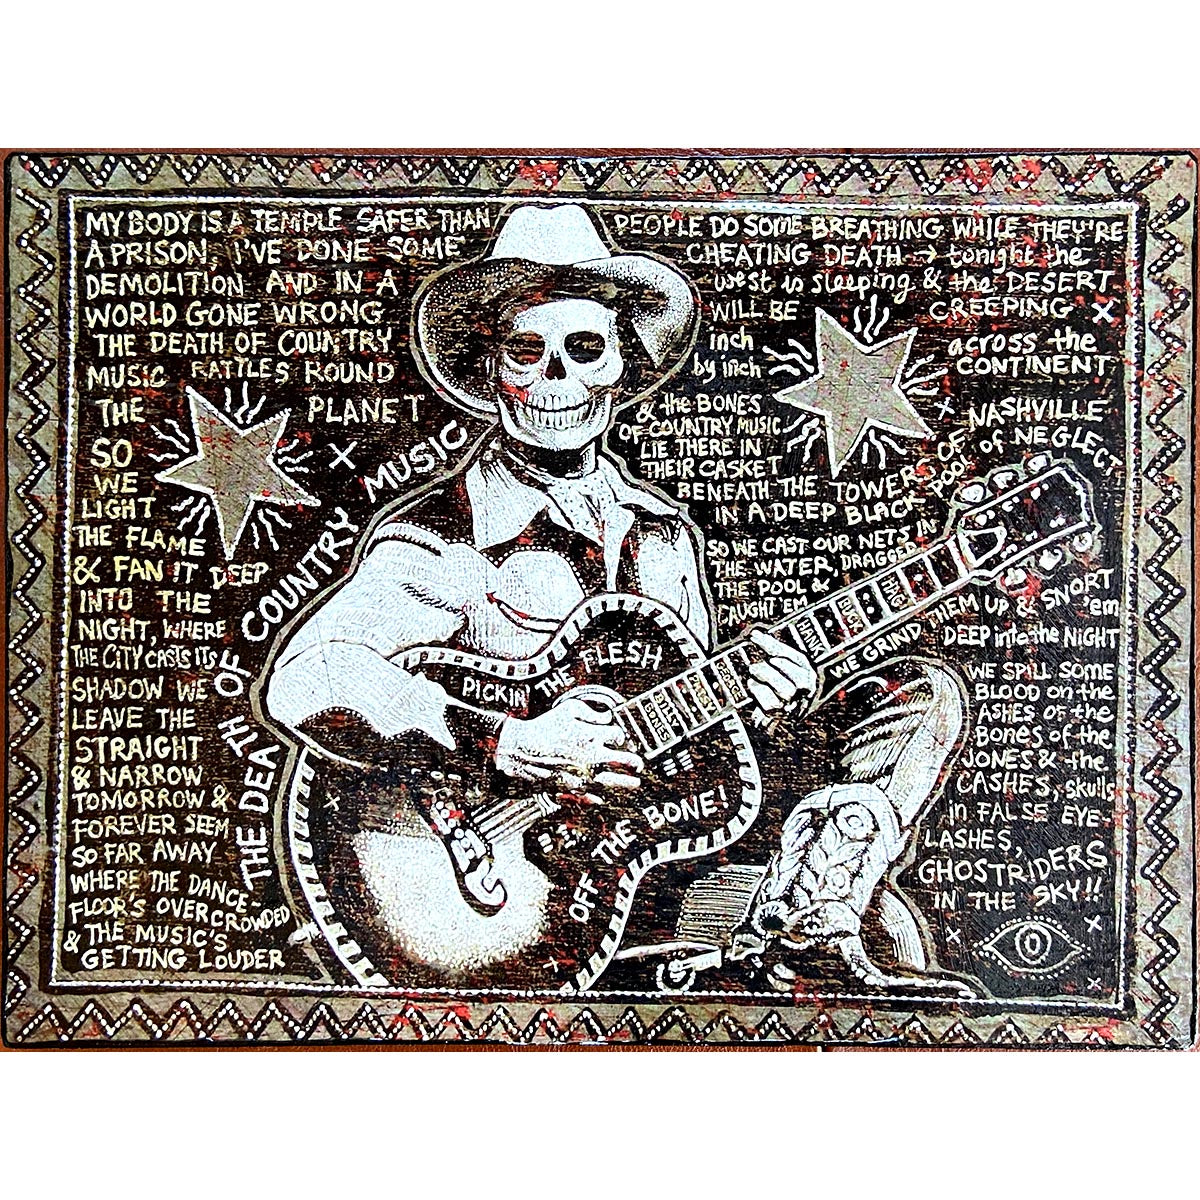 Jon Langford - Song Painting #7: Death Of Country Music